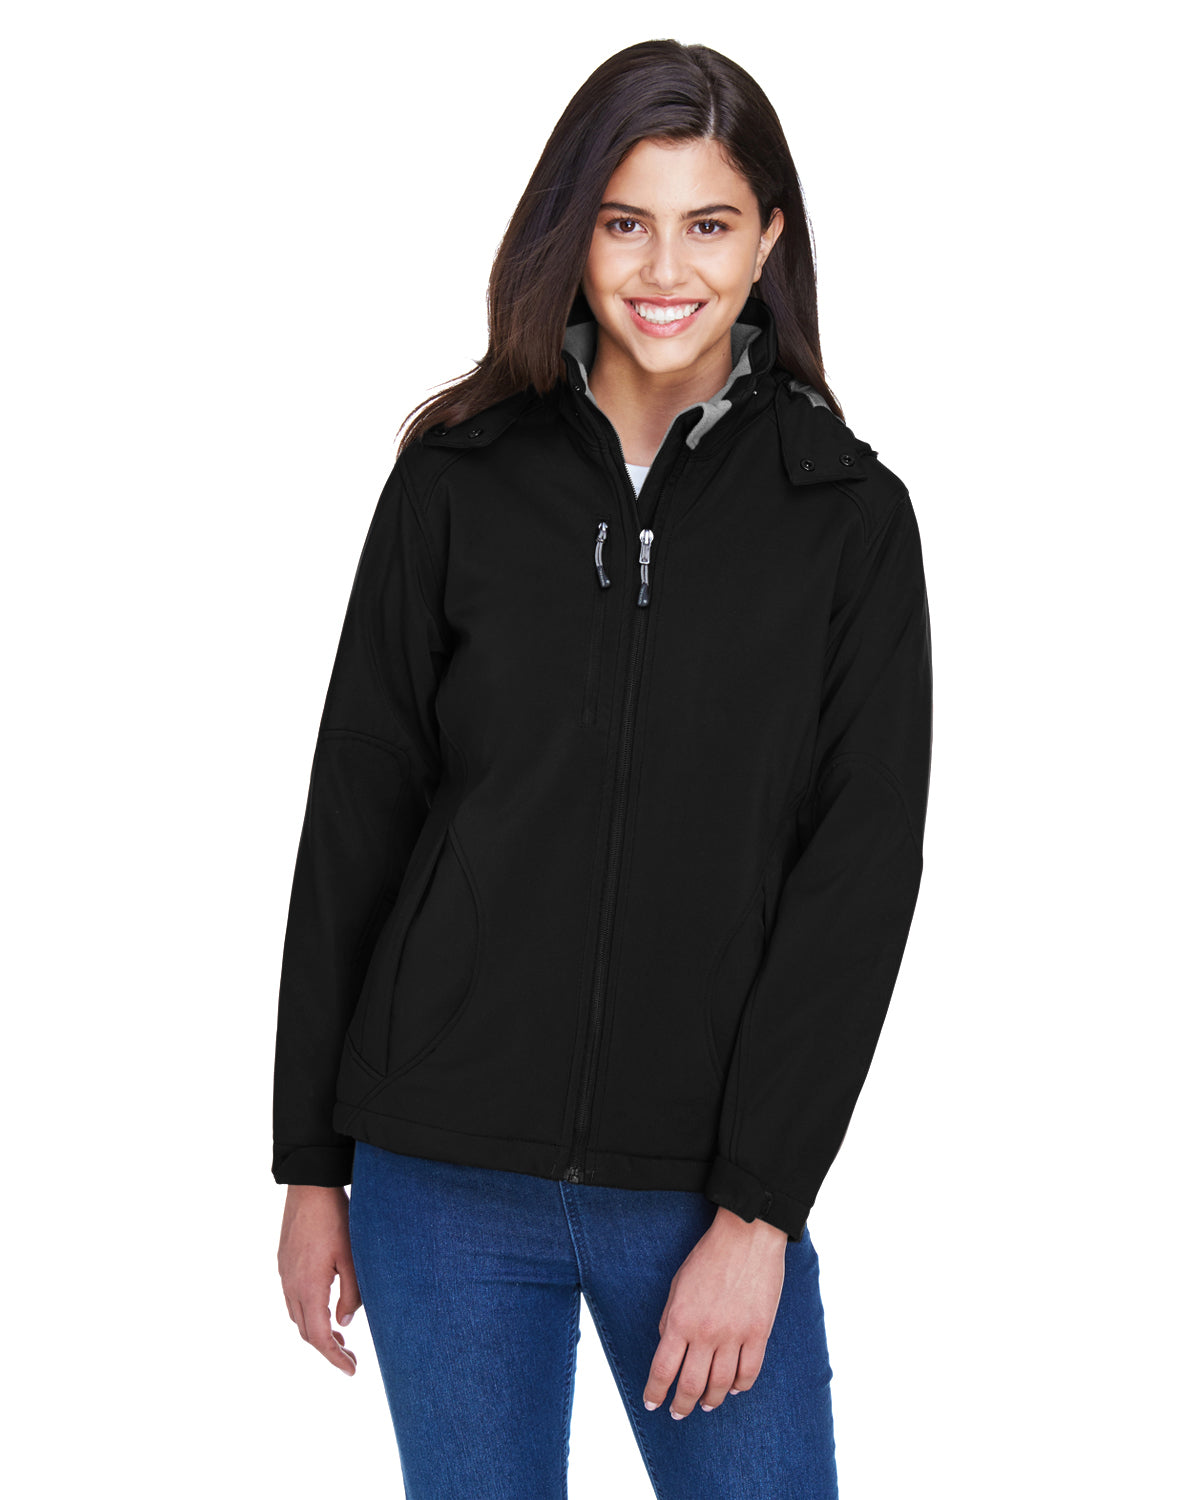 LADIES NORTH END GLACIER INSULATED 3 LAYER SOFT SHELL JACKET - ID